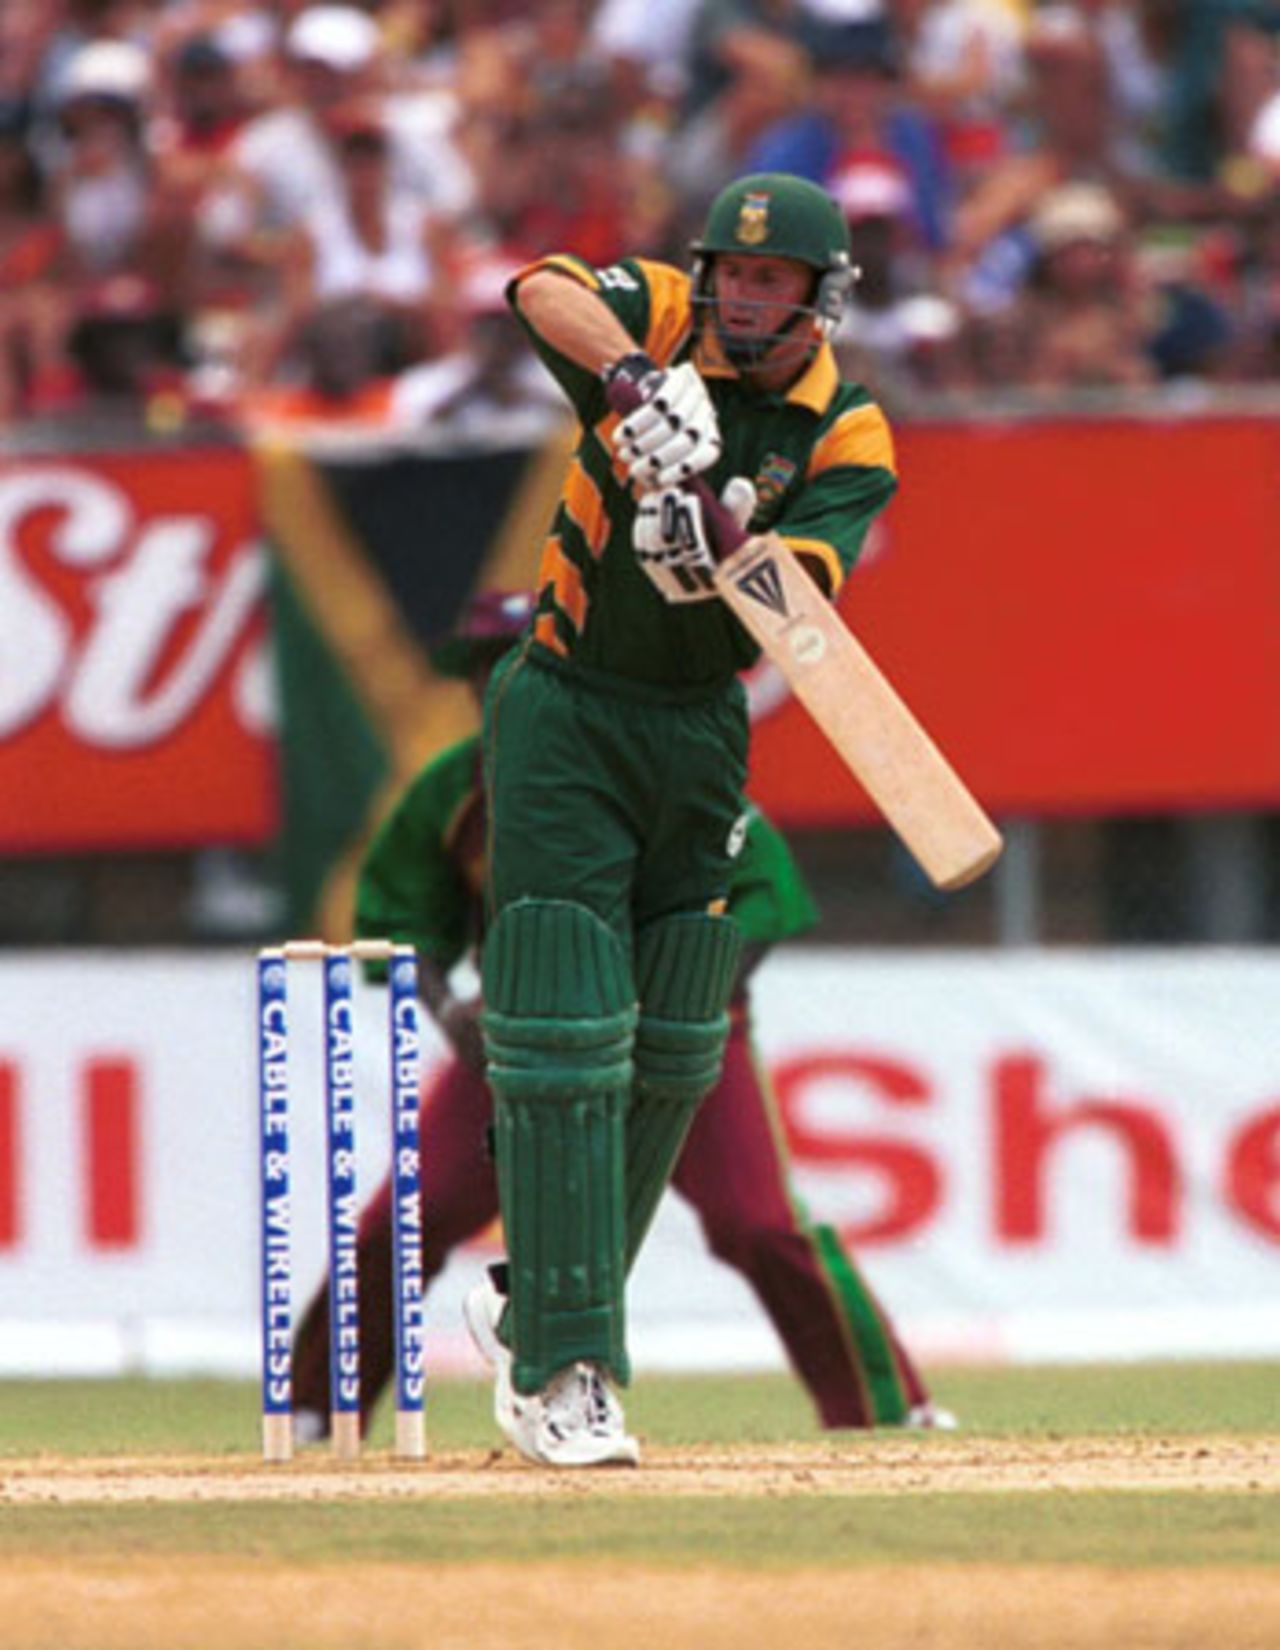 Gary Kirsten turns one to leg, 4th ODI at Queen's Park (New) St George's, Grenada , 6th May 2001